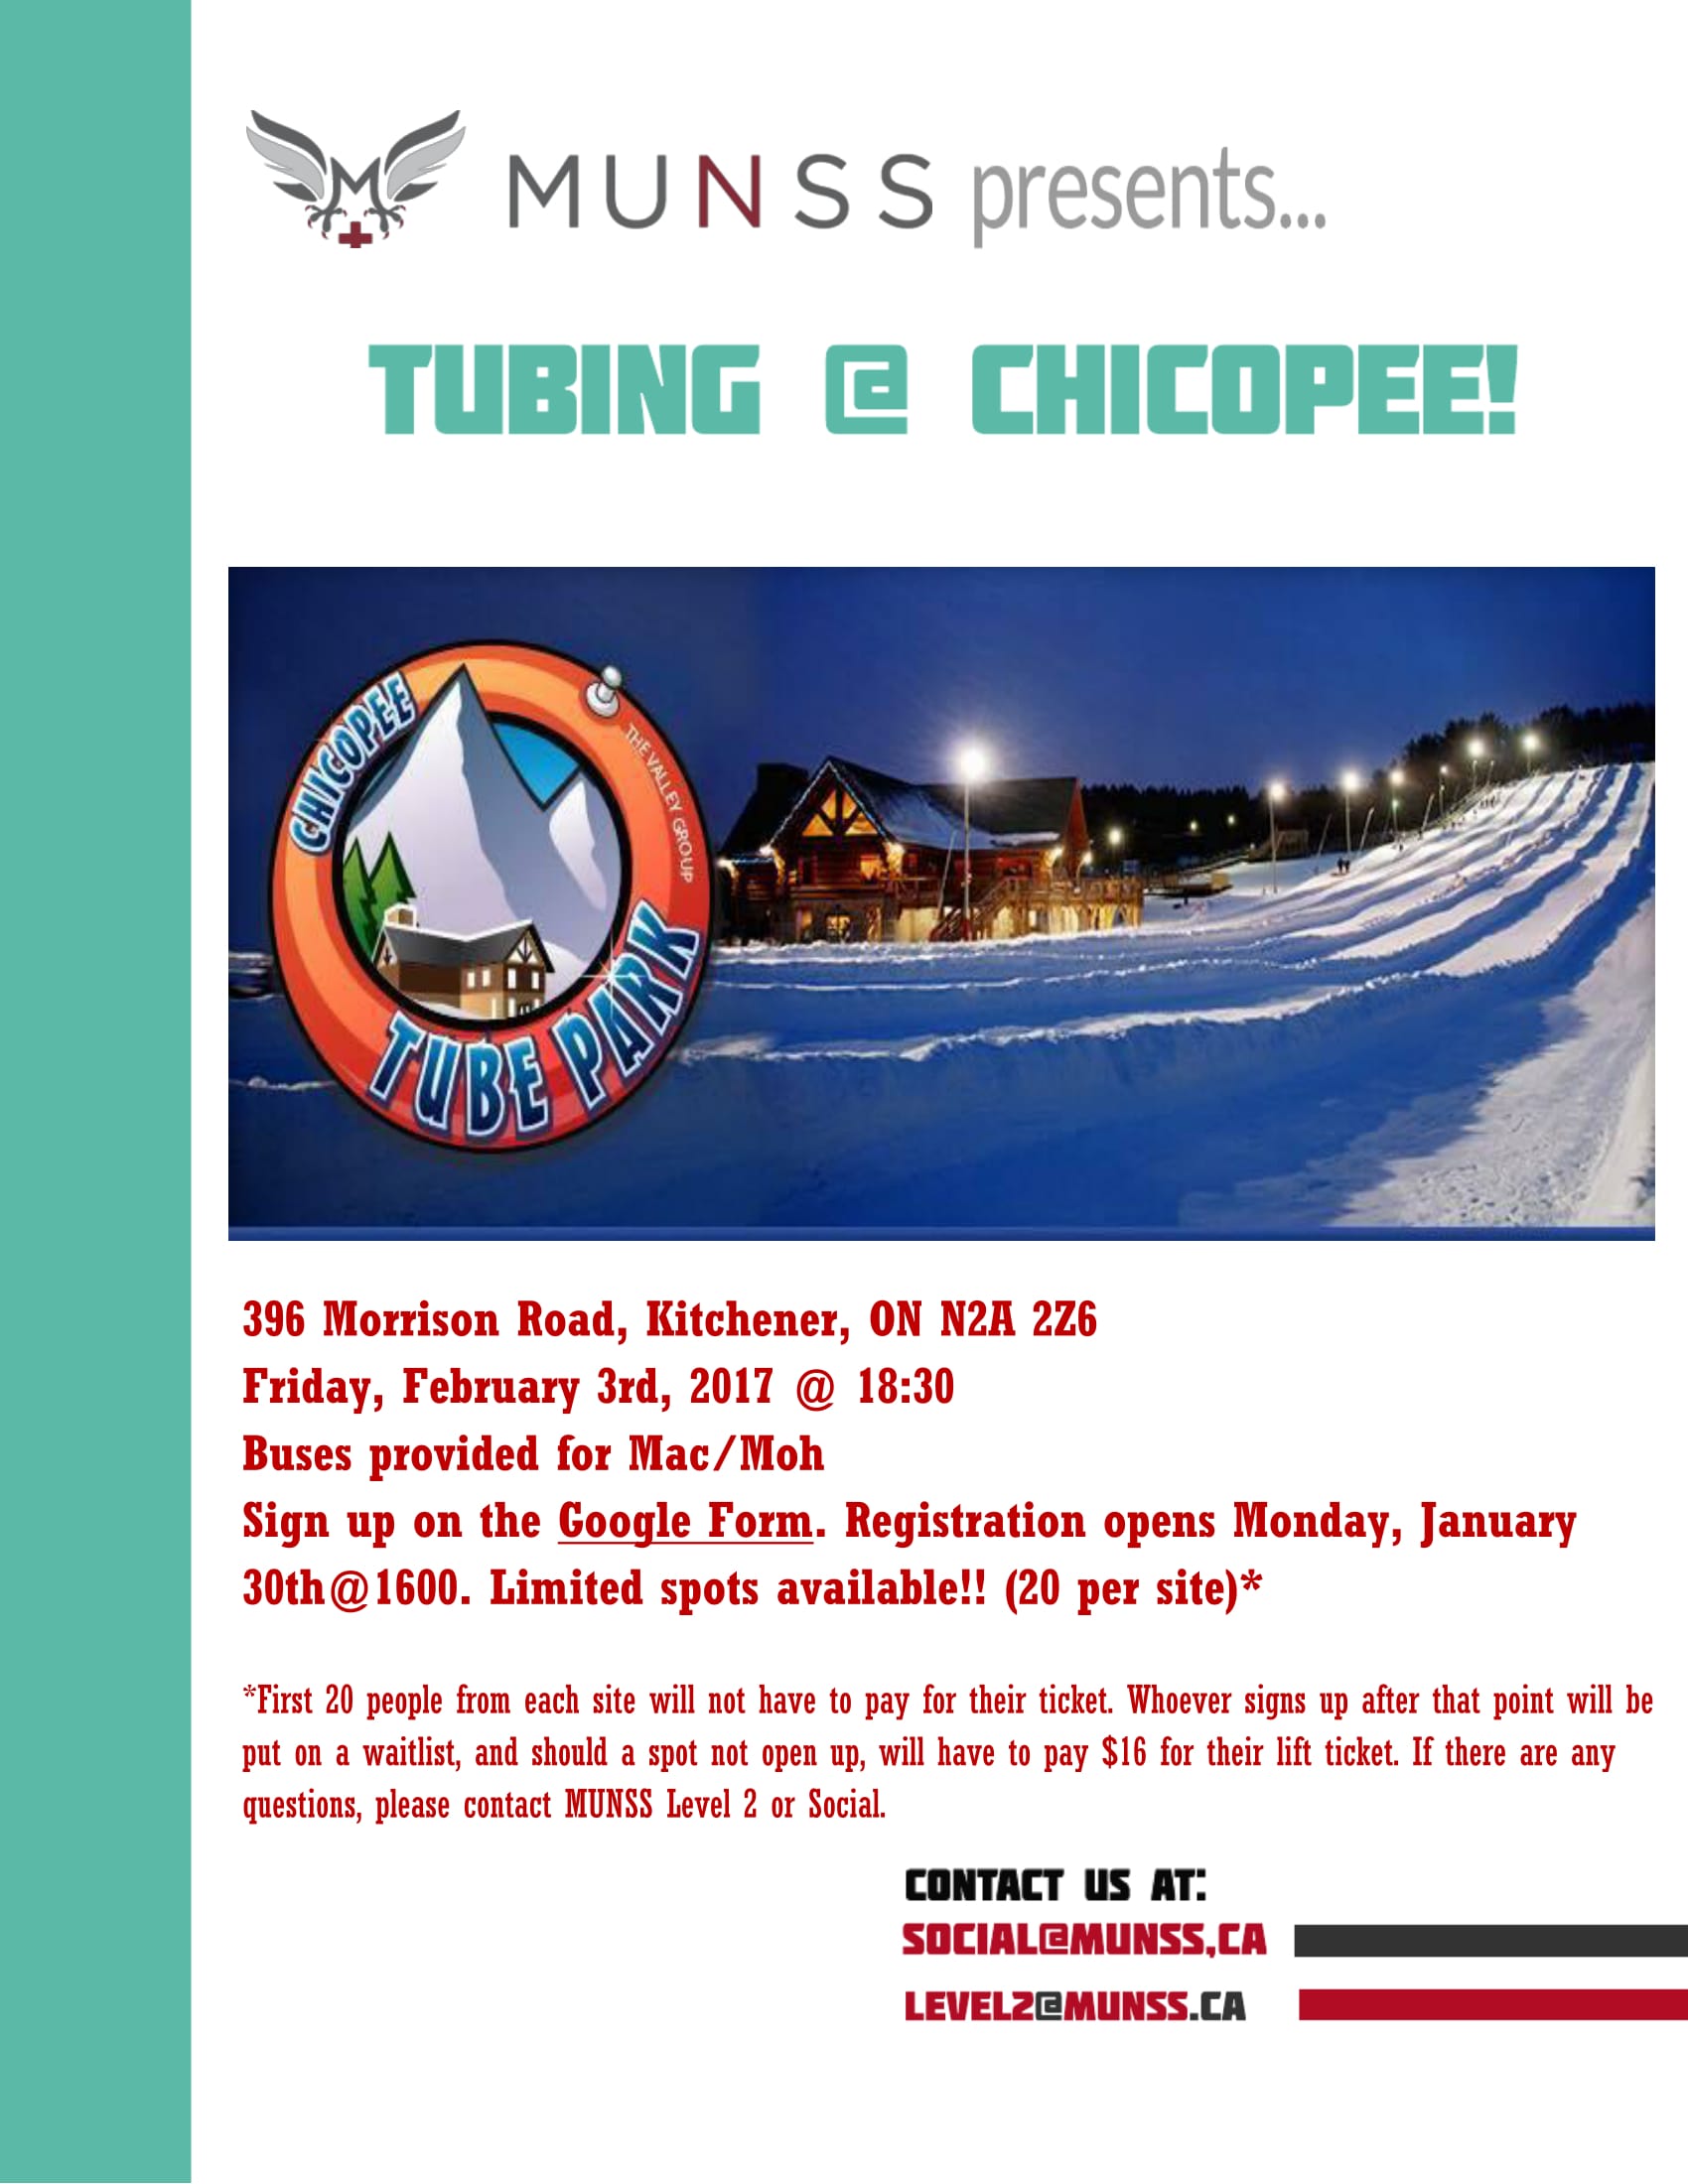 MUNSS-Tubing-Event (1)-1